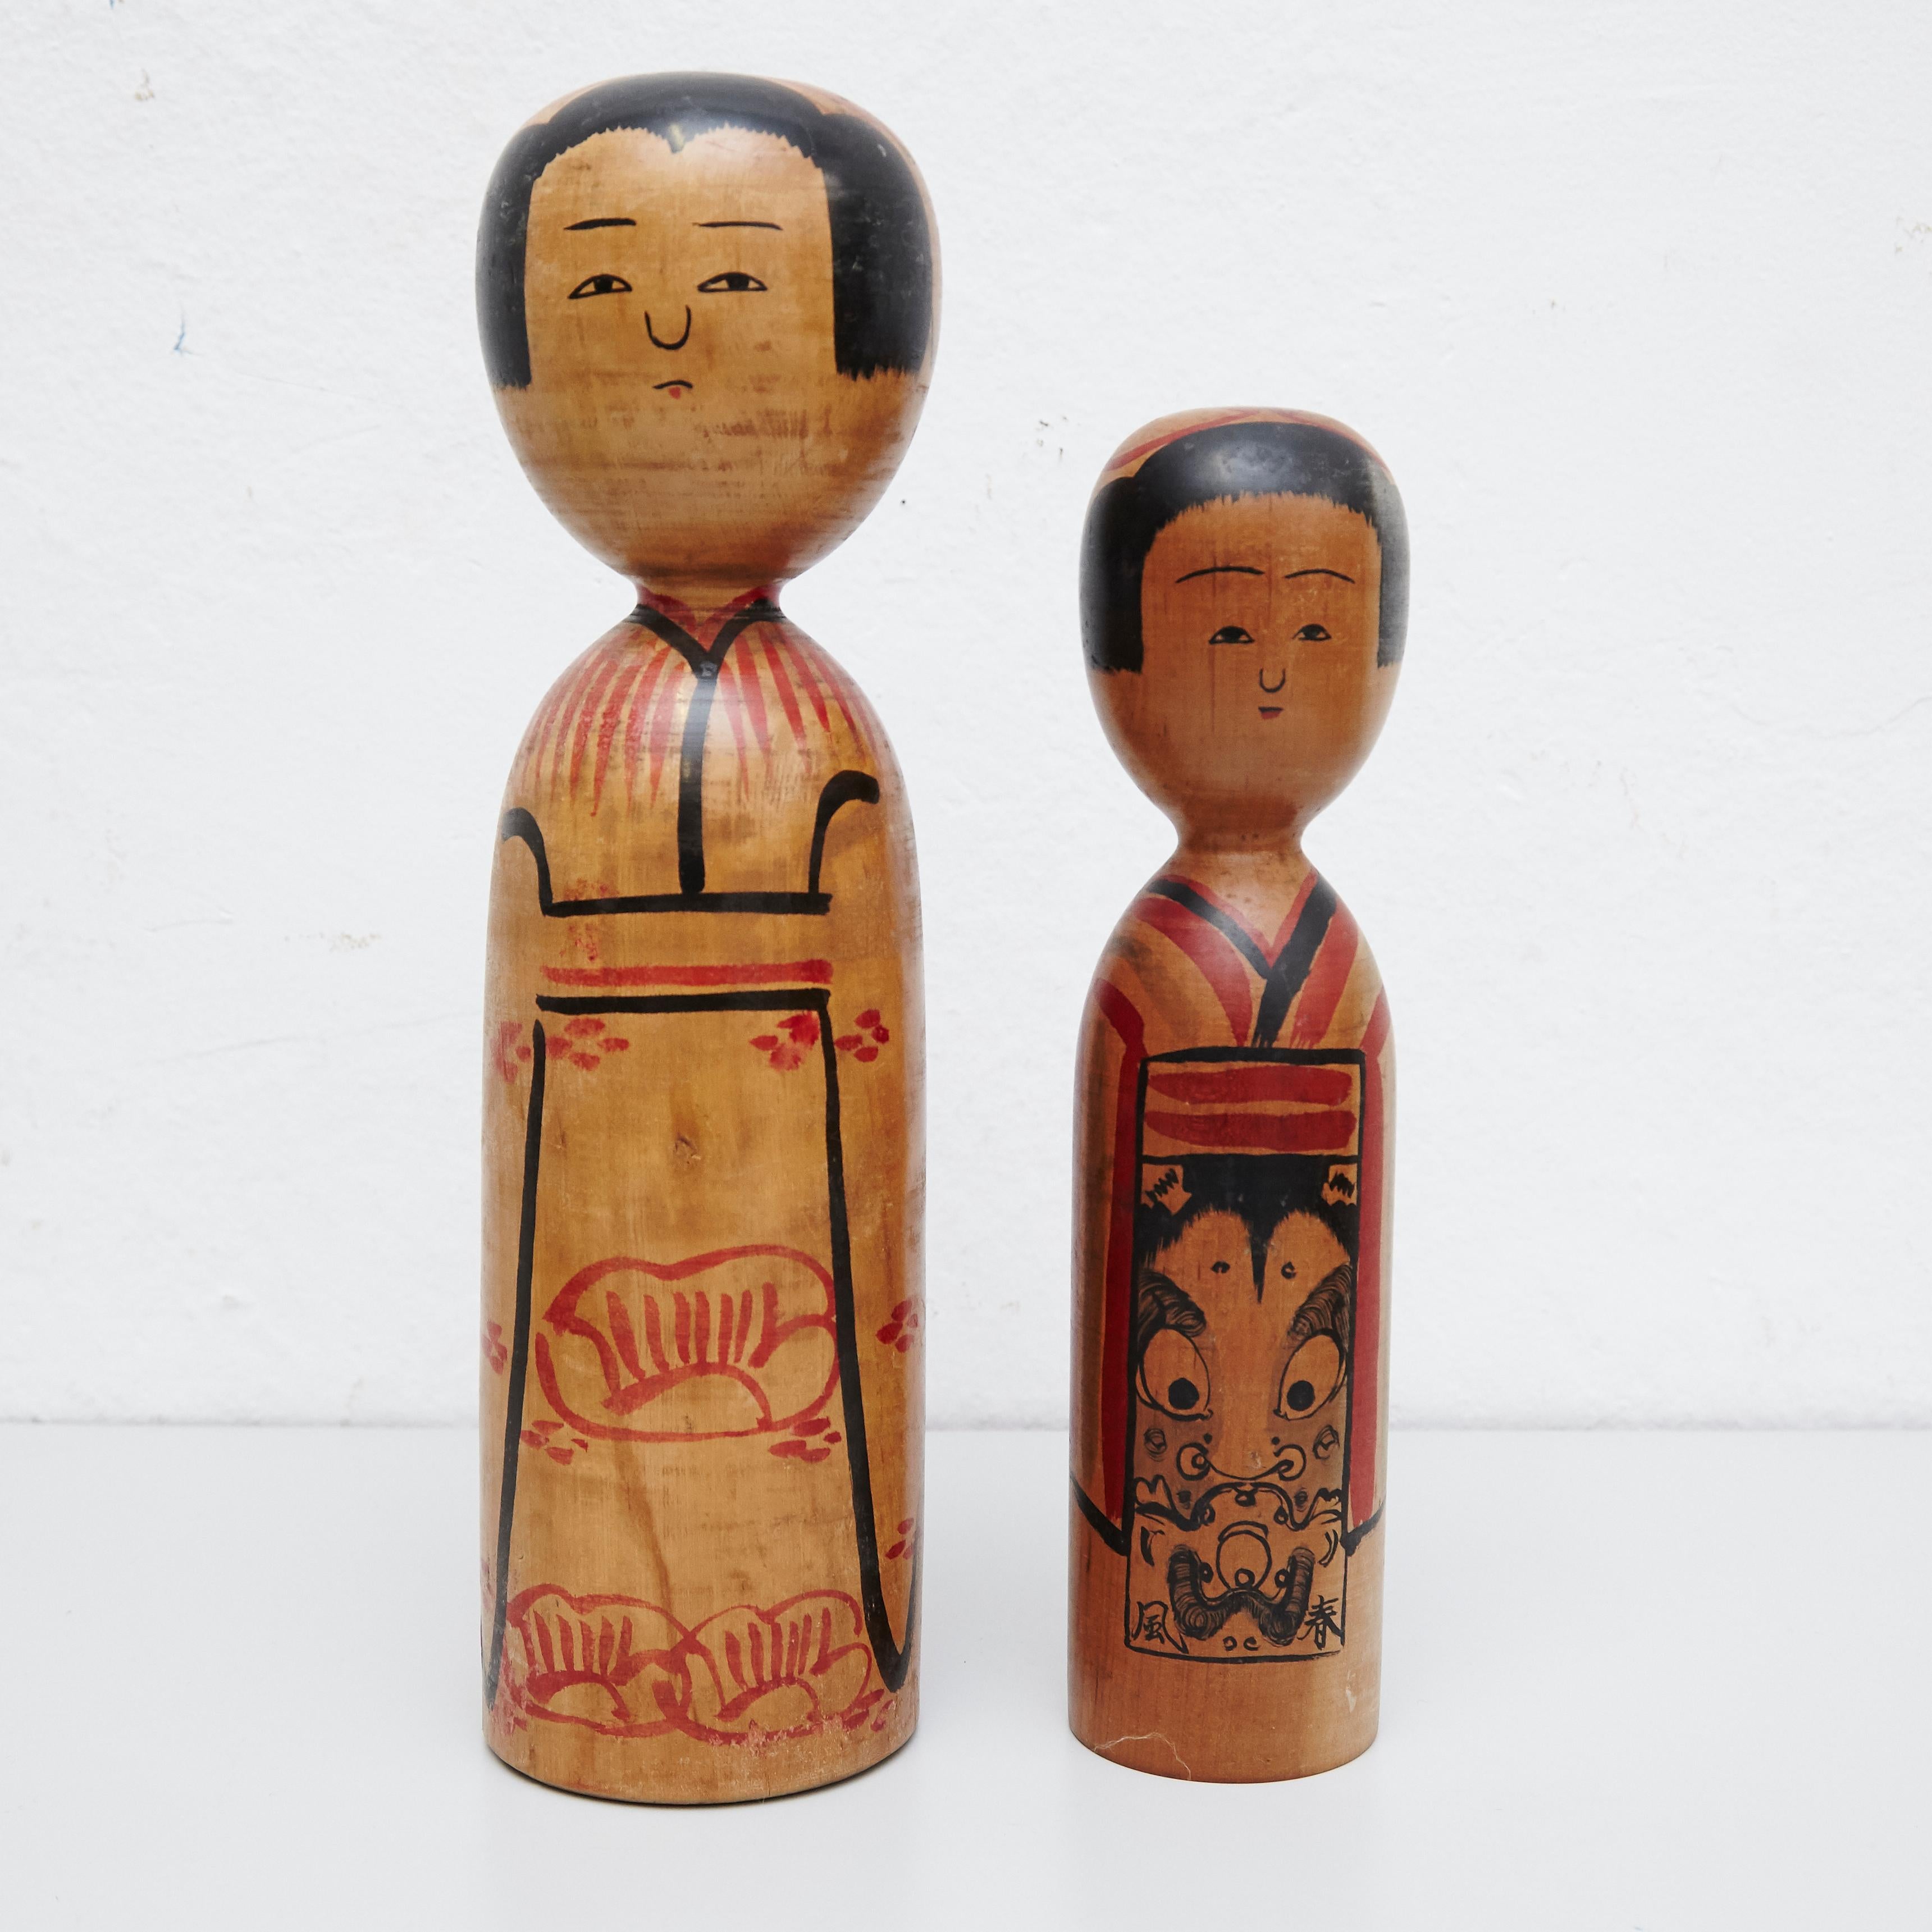 Japanese dolls called Kokeshi of the early 20th century.
Provenance from the northern Japan.
Set of 2.

Measures: 

30.5 x 7.5 cm
37 x 10 cm


Handmade by Japanese artisants from wood. Have a simple trunk as a body and an enlarged head.